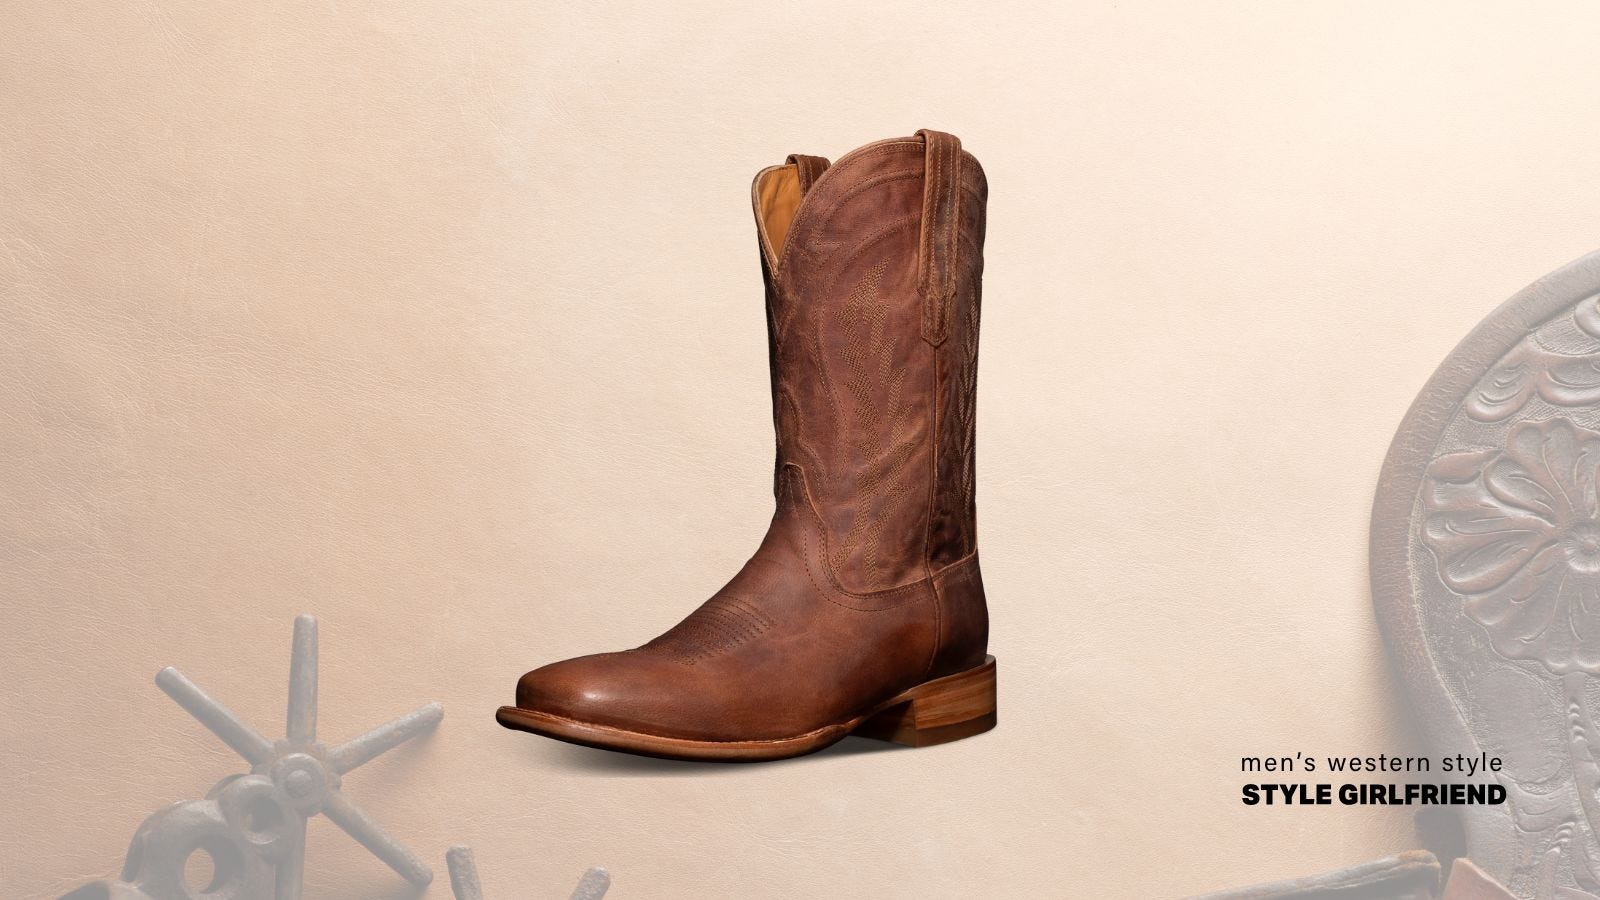 image of a single brown cowboy boot, set against a tan, western-themed background